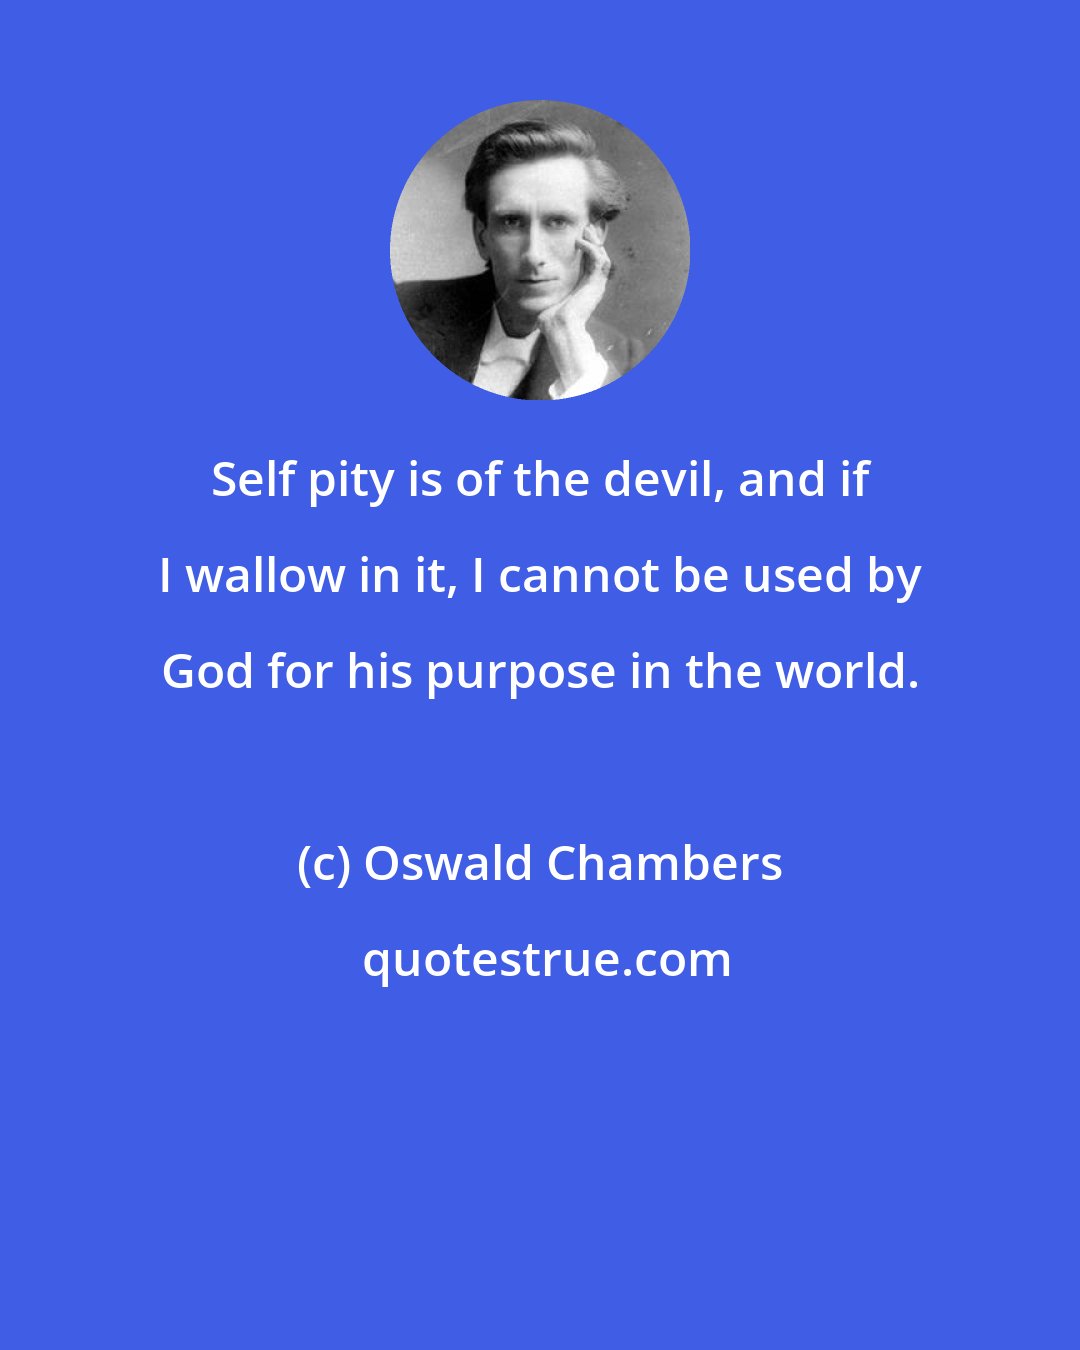 Oswald Chambers: Self pity is of the devil, and if I wallow in it, I cannot be used by God for his purpose in the world.